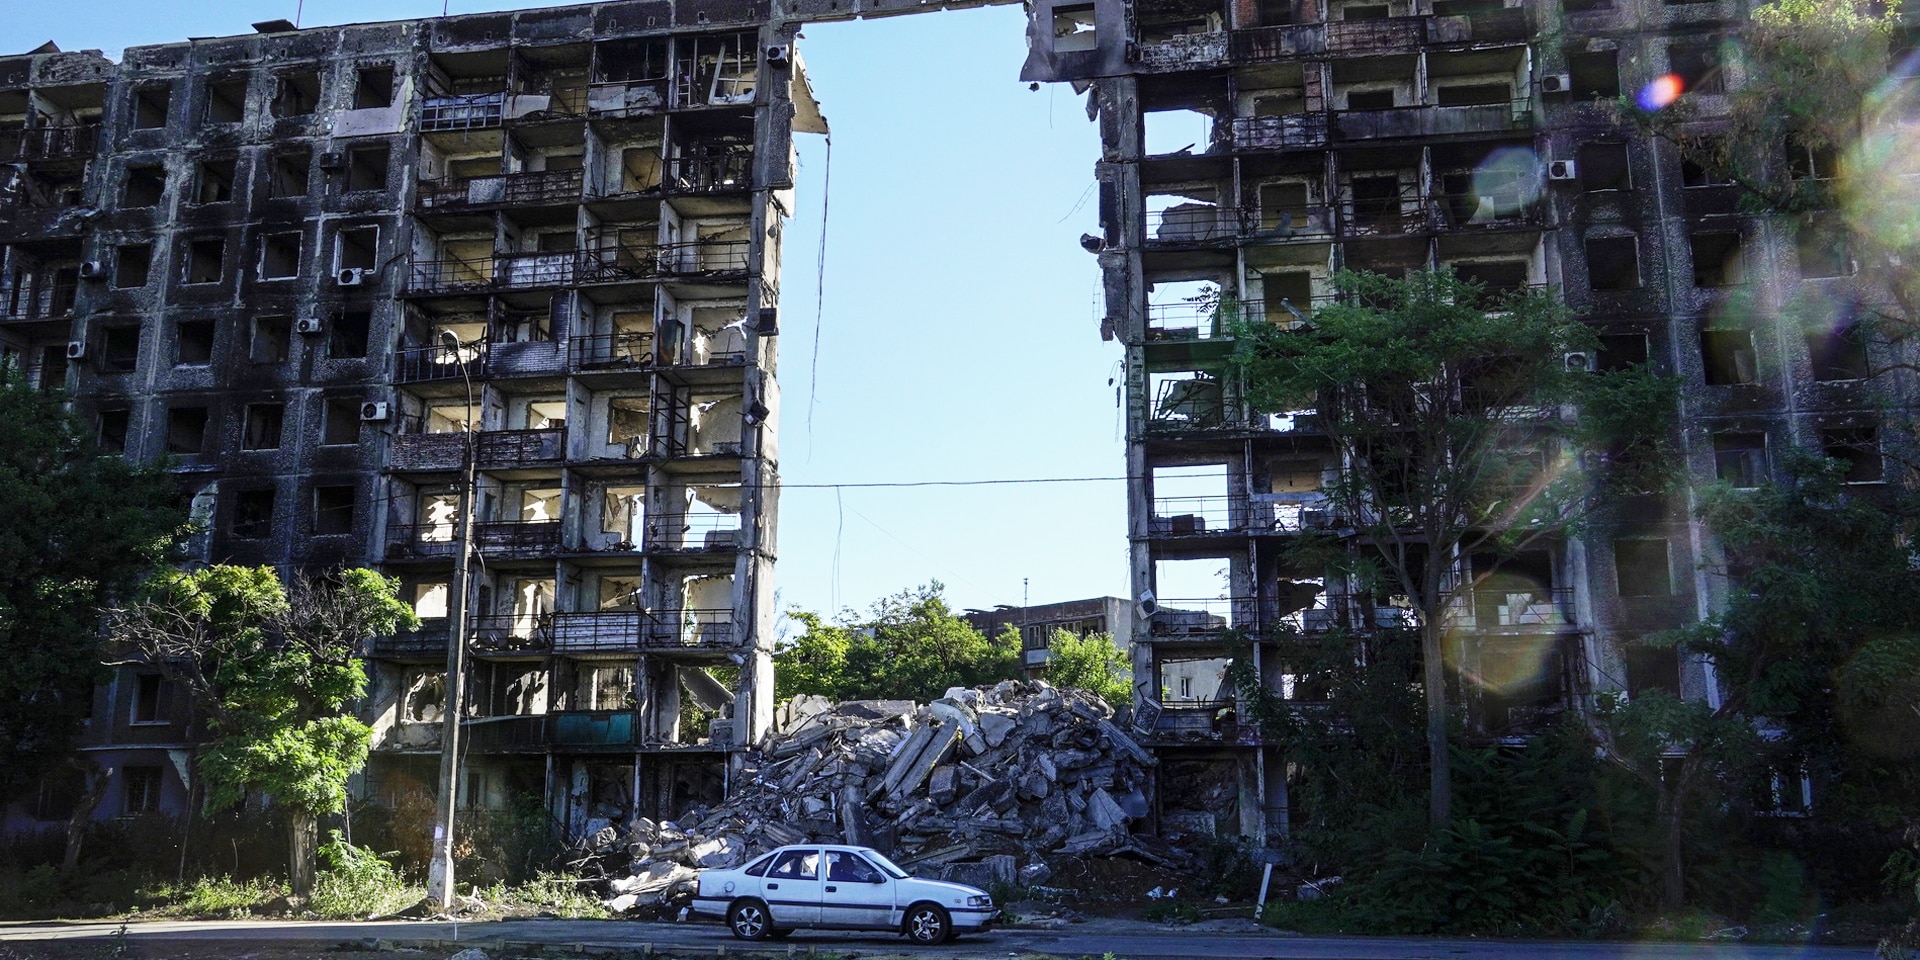 A white car in front of housing blocks destroyed by shelling. A blue sky is visible through a large gap in the blocks.